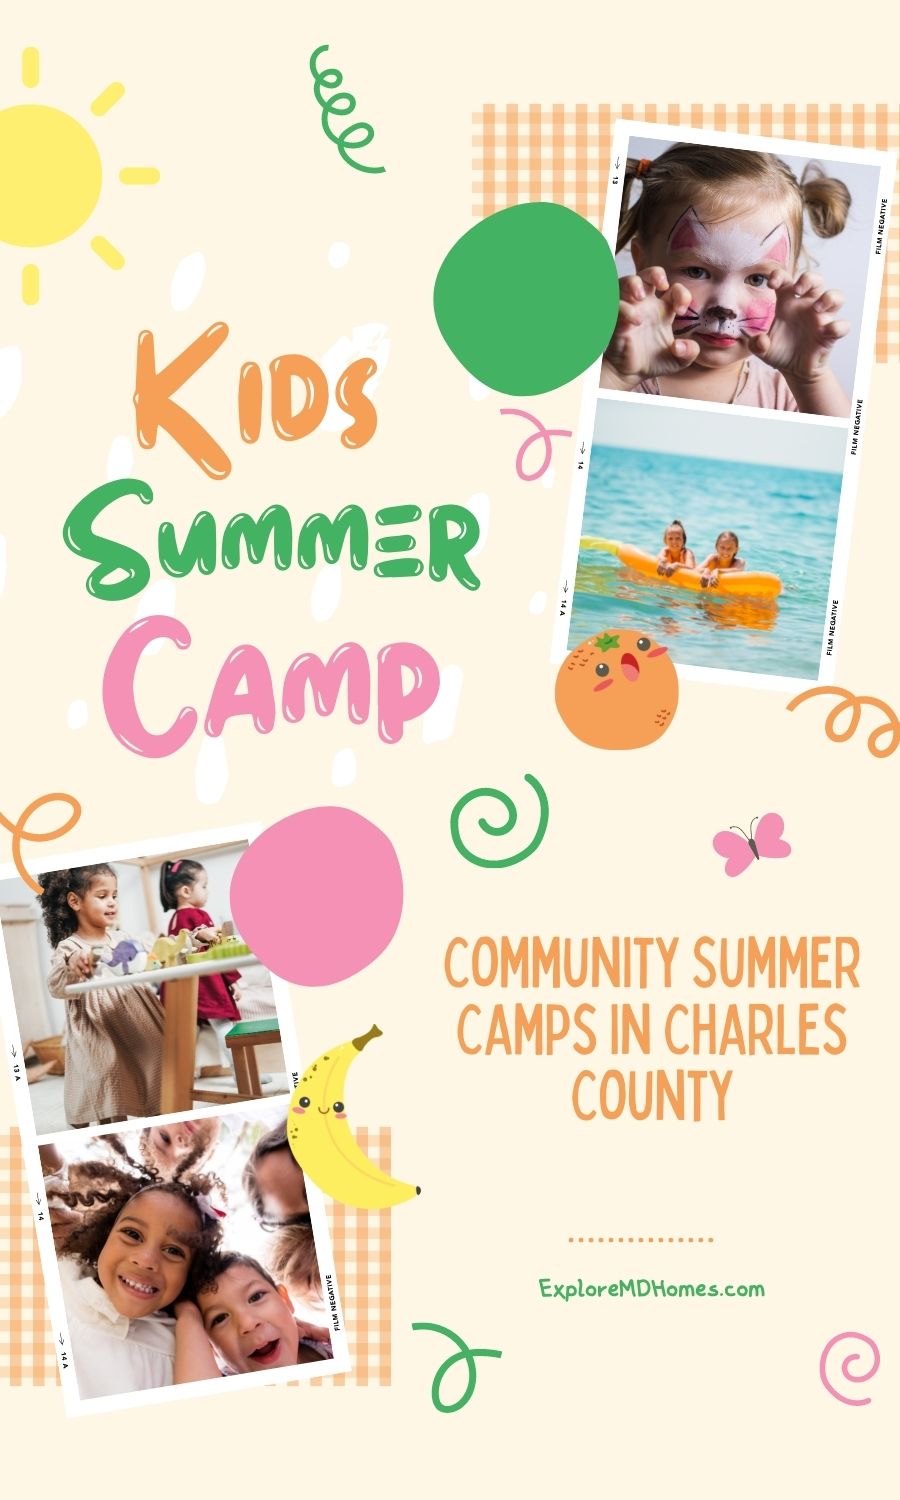 Community Summer Camps in Charles County